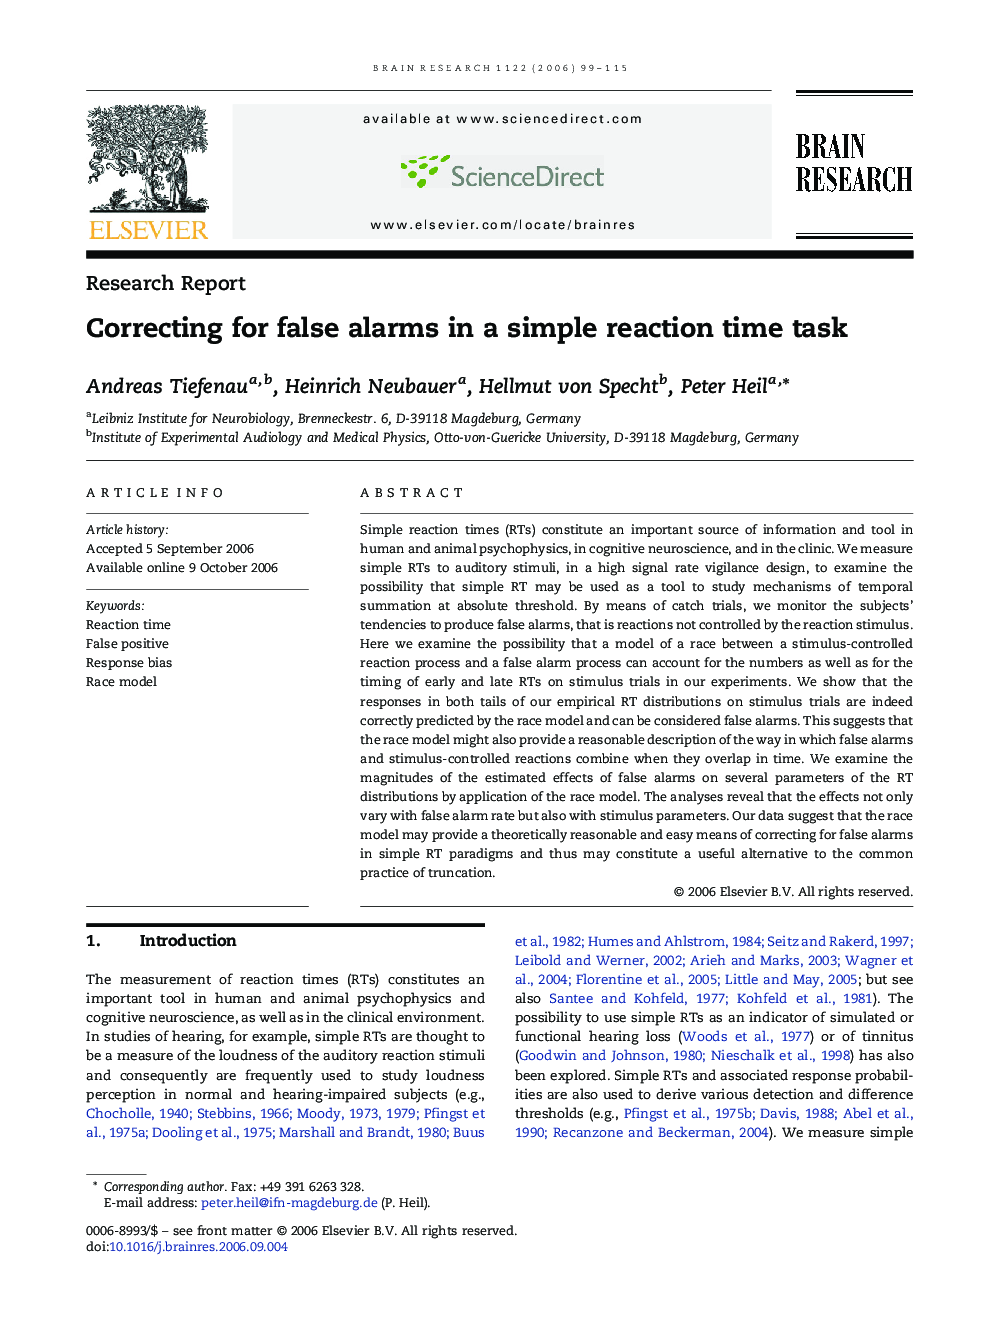 Correcting for false alarms in a simple reaction time task